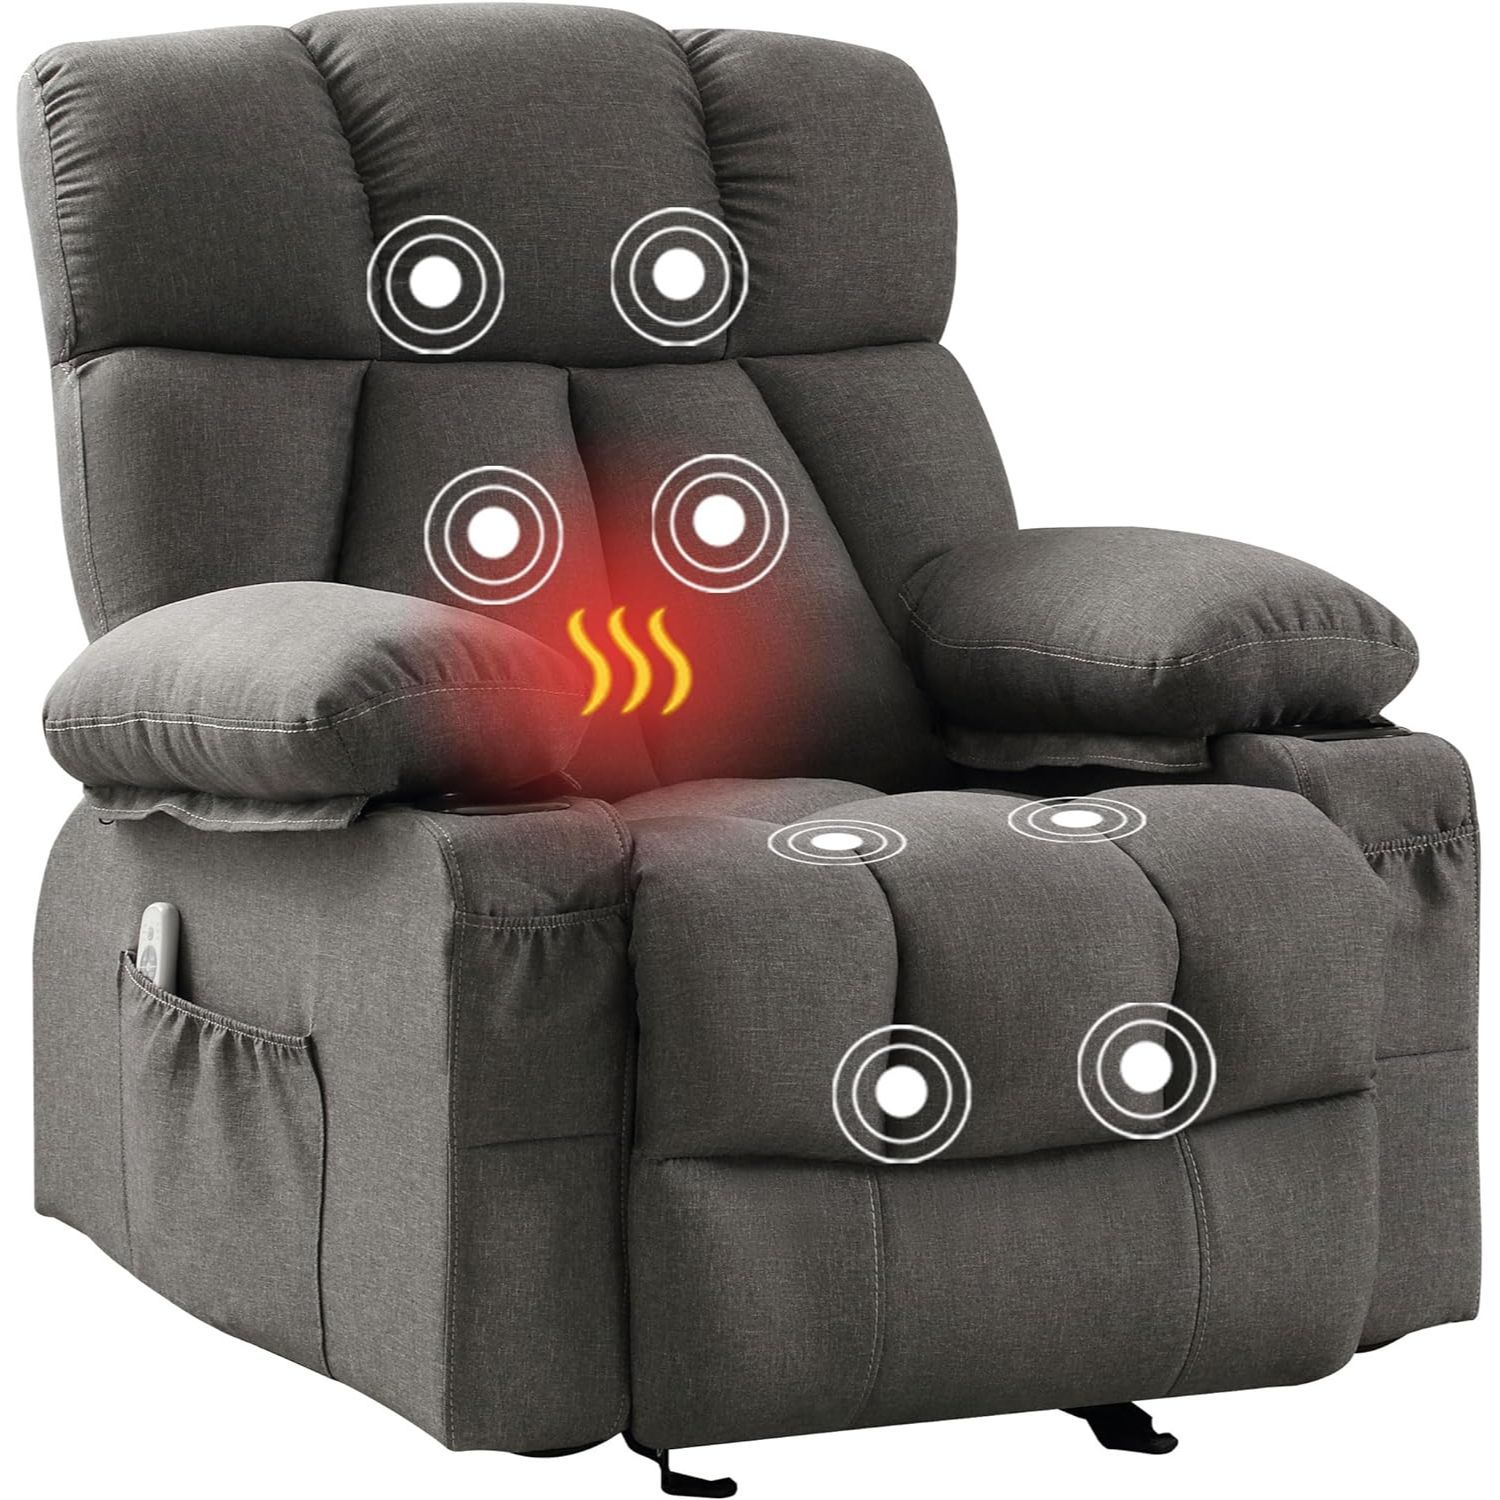 

Massage Rocker Recliner Chair With Heat And Vibration Ergonomic Rocking Lounge Chair For Living Room Comfy Overstuffed Recliner With 4 Side Pockets, 2 Cup Holders, Usb Charge Port, Grey